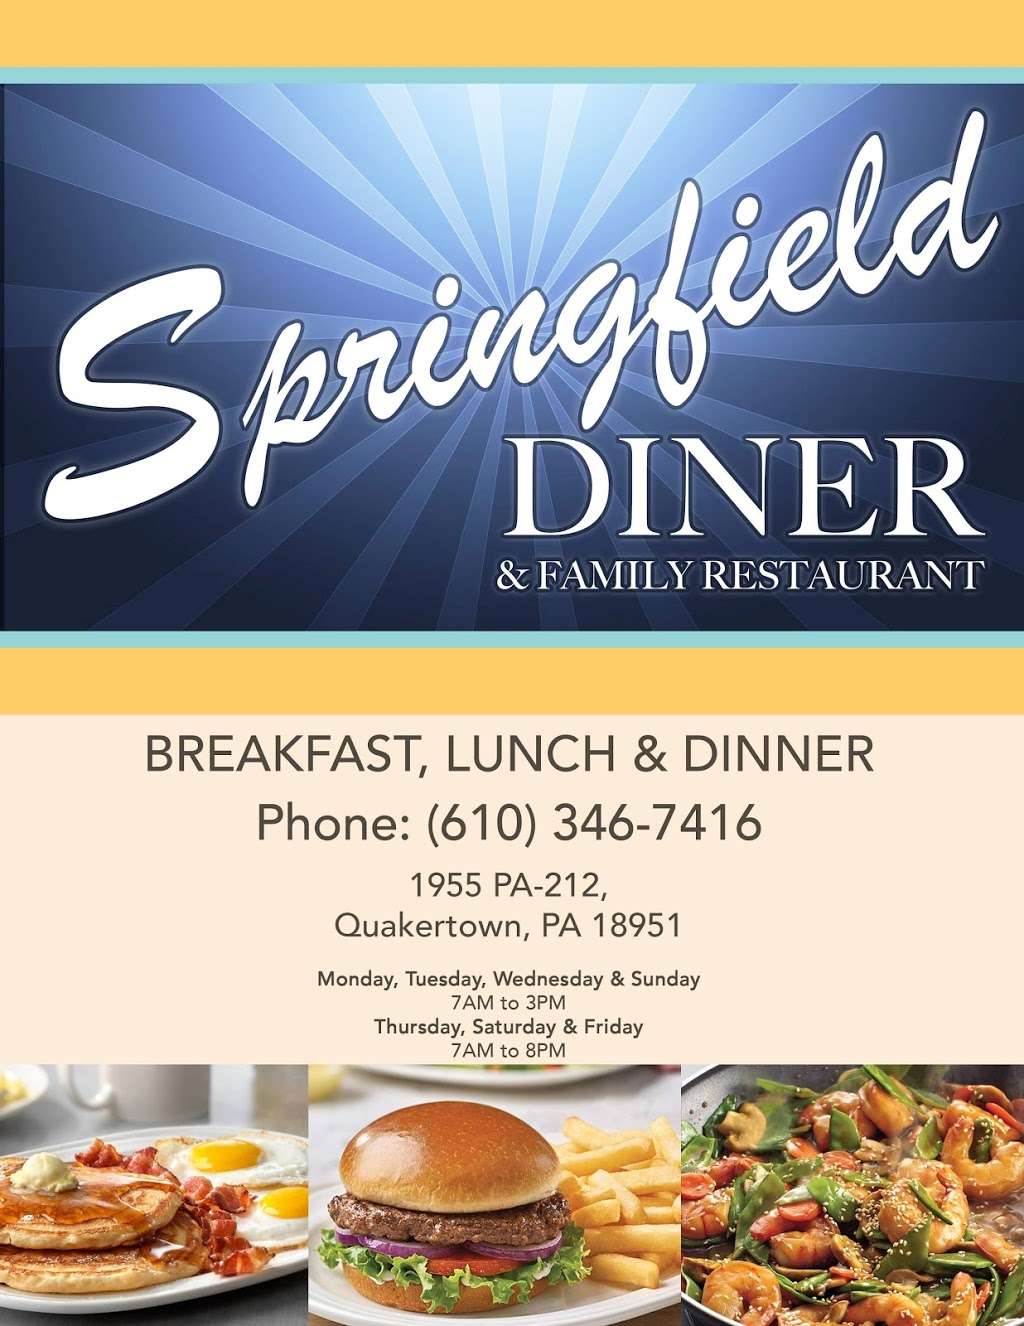 Springfield Diner & Family Restaurant | 1955 PA-212, Quakertown, PA 18951 | Phone: (610) 346-7416